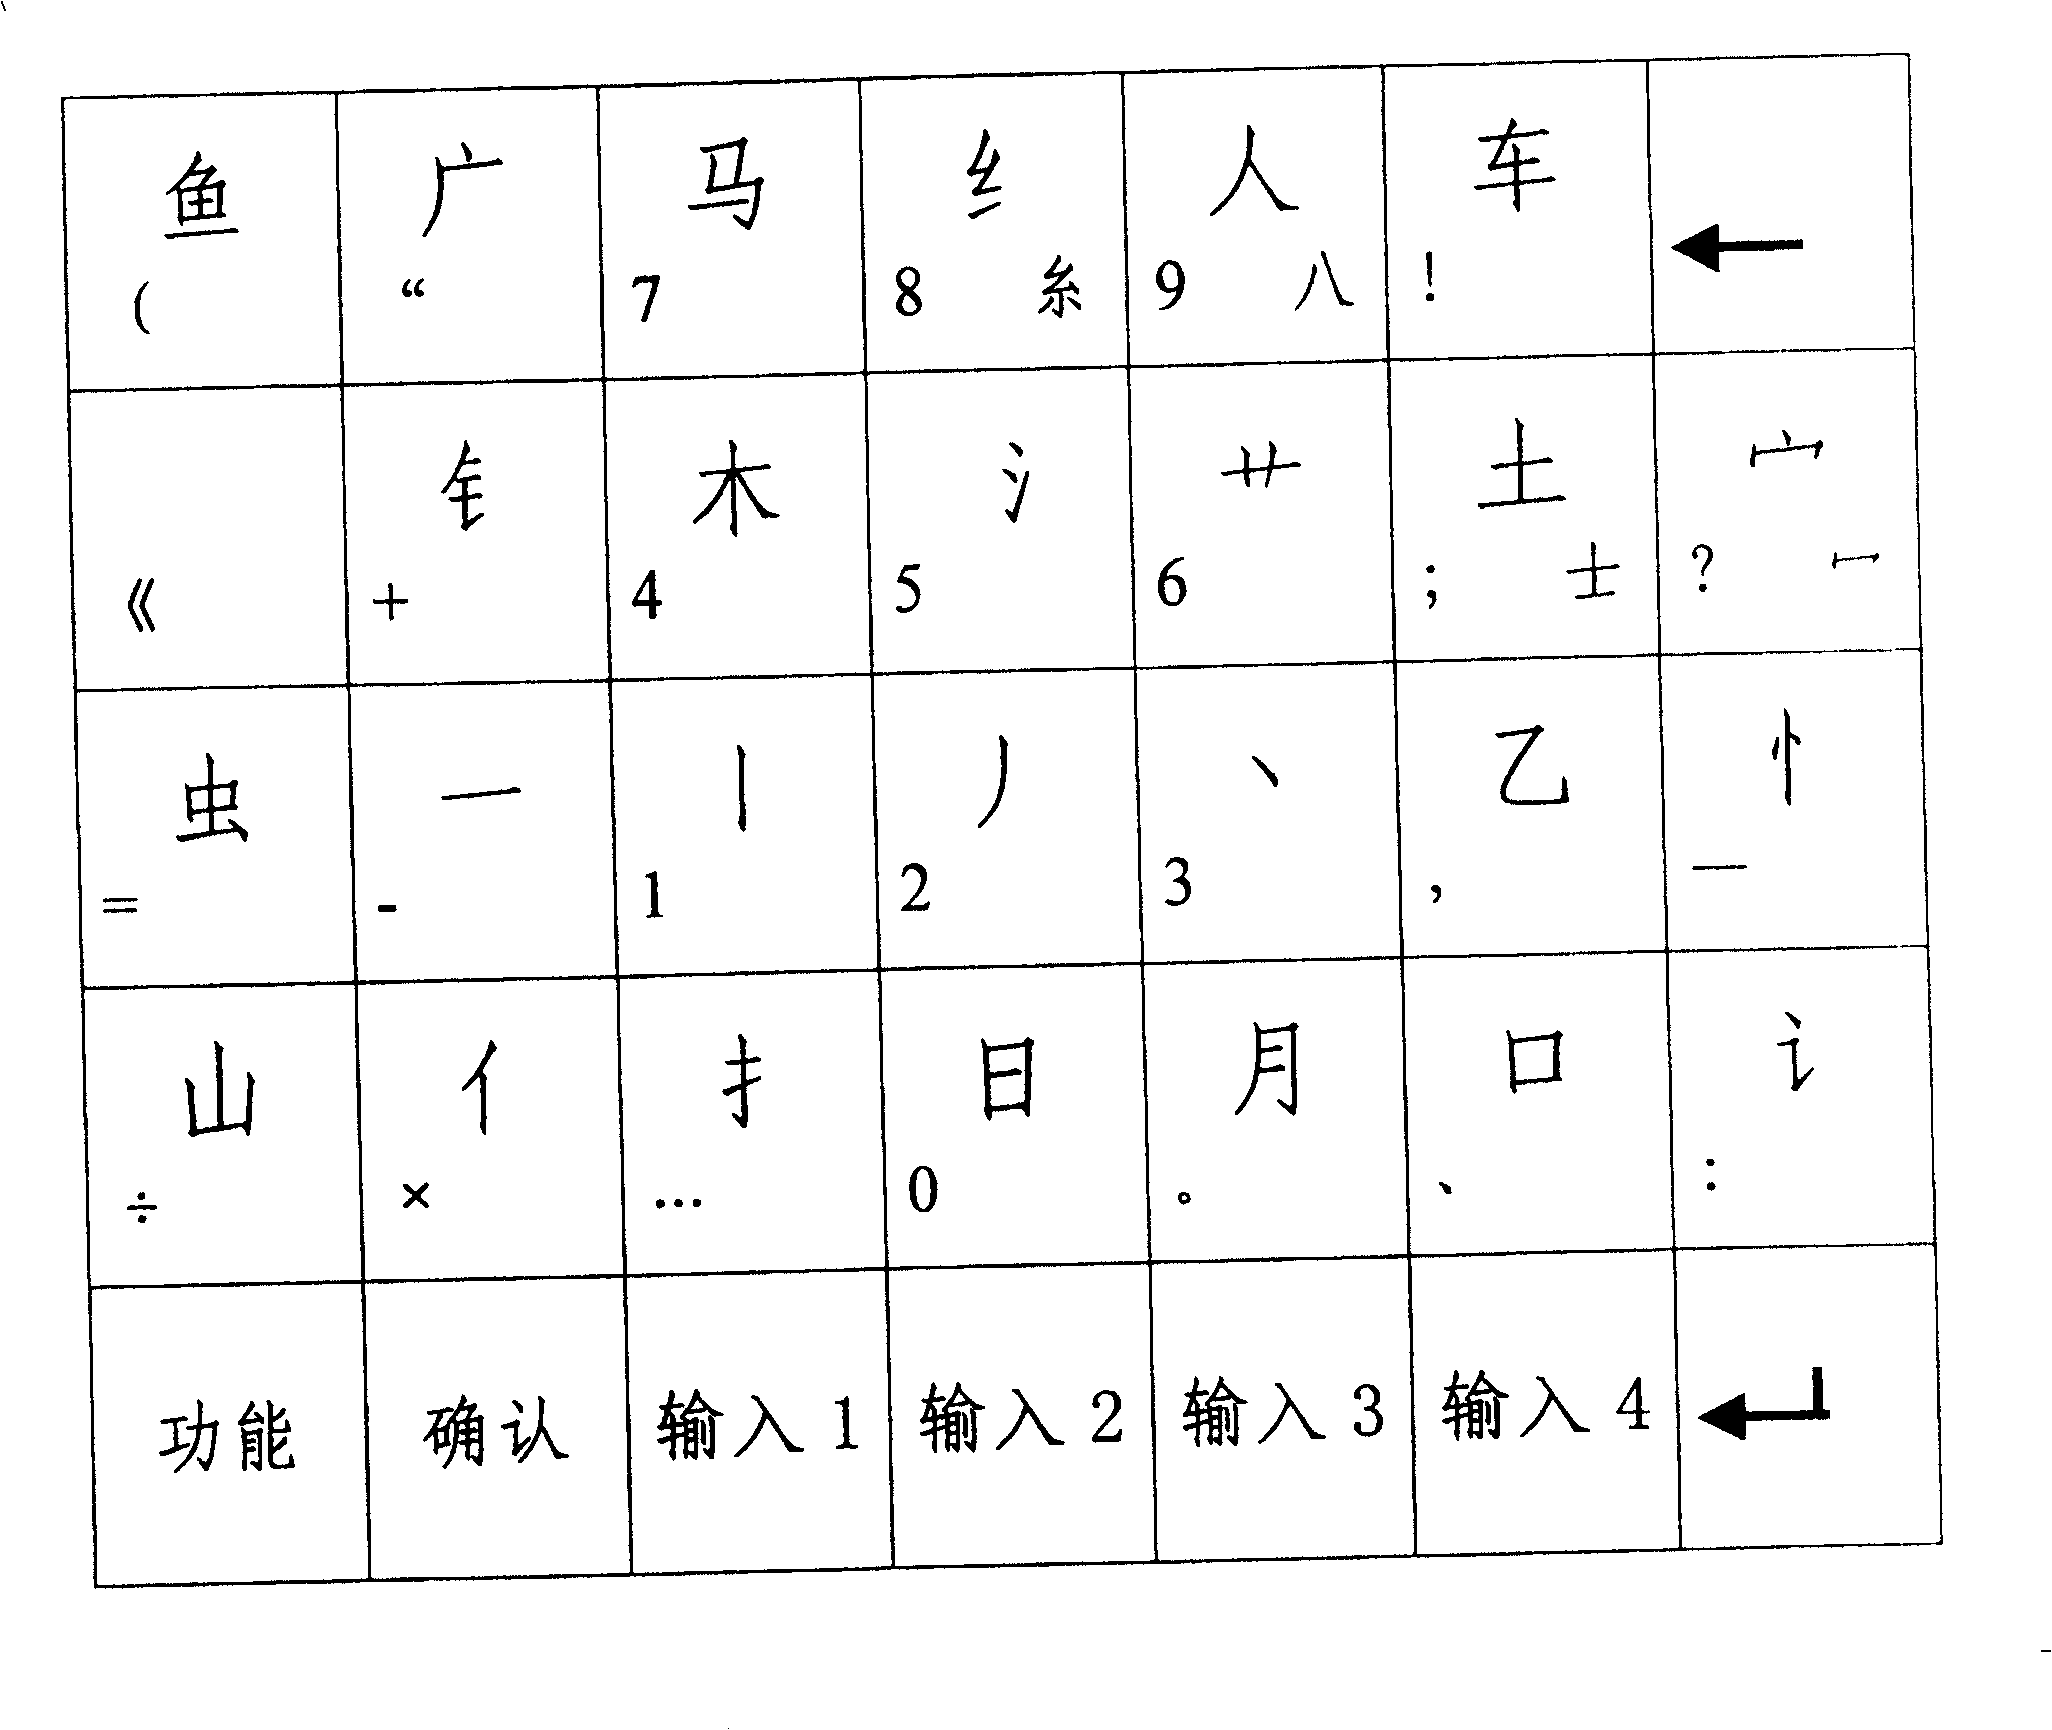 Chinese document quick-speed input processing technology and keyboard thereof